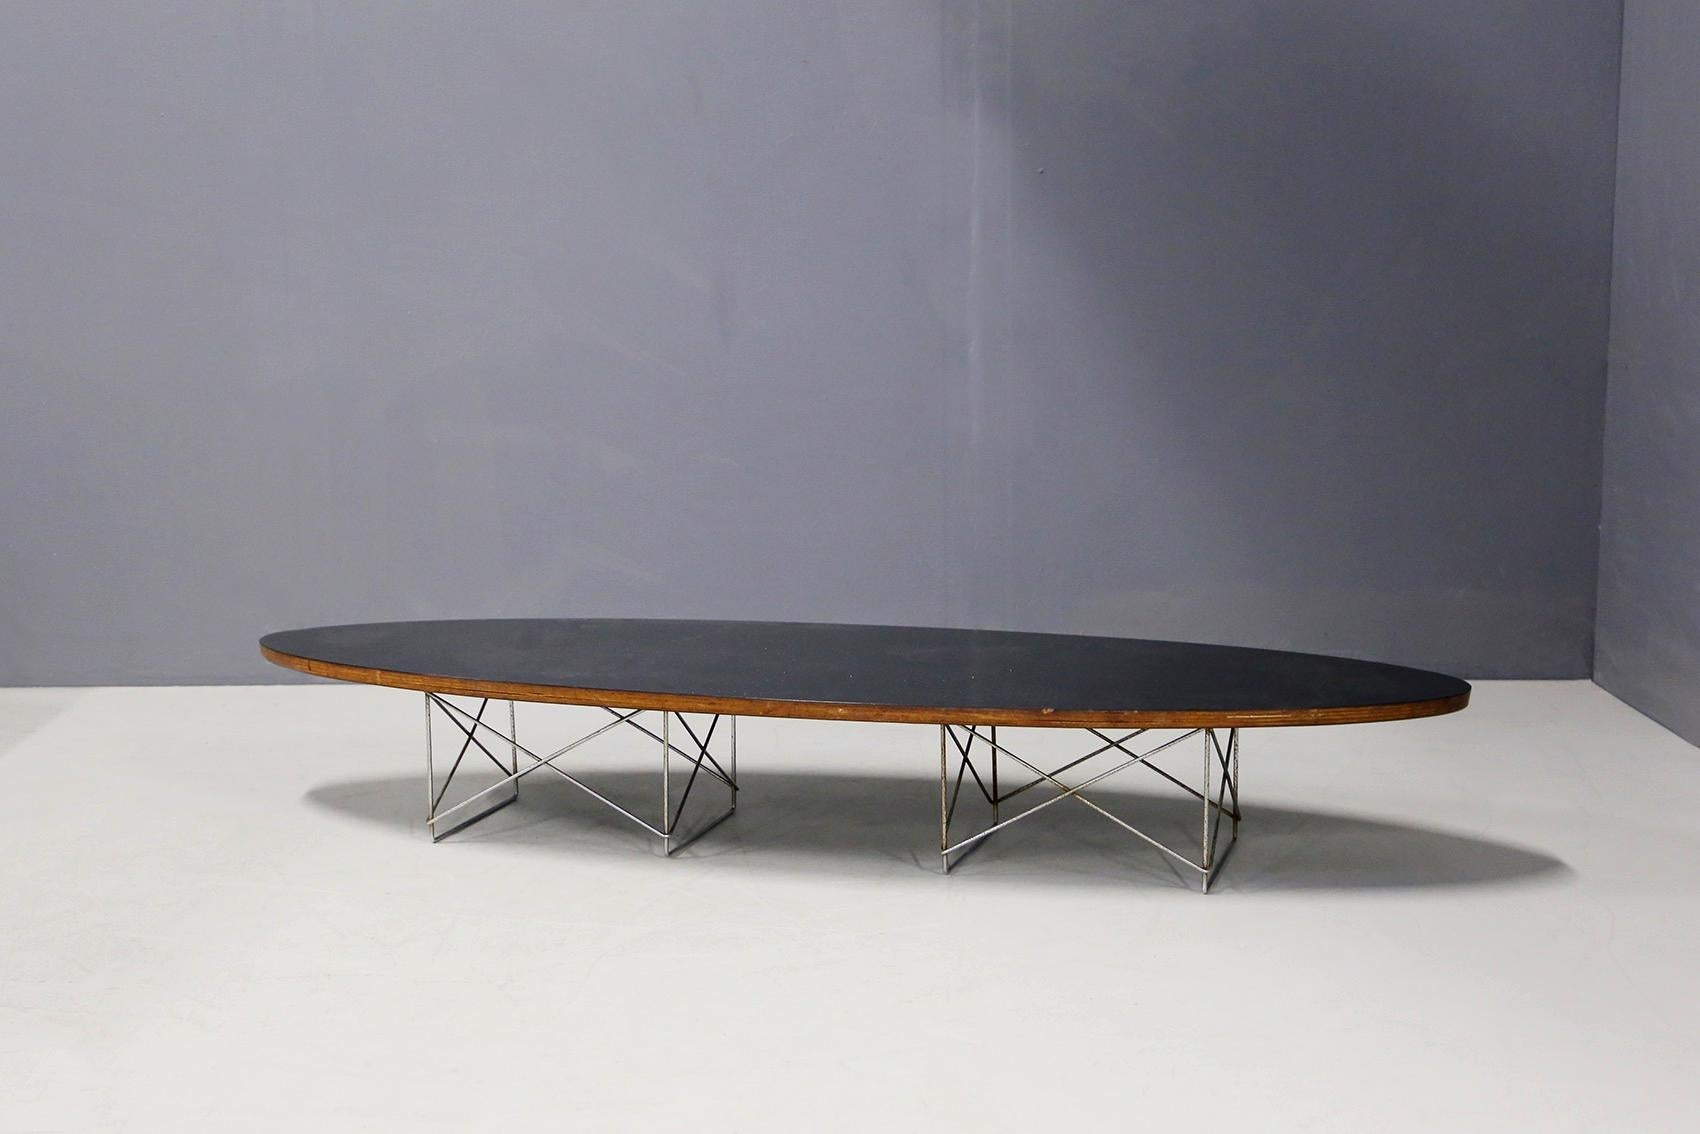 Charles and Rat Eames' table is reminiscent of a surfboard for its elliptical top. Original label under the table top. The low coffee table named ETR (Elliptical Table Rod Base) has also been nicknamed 'surfboard table'. With its double